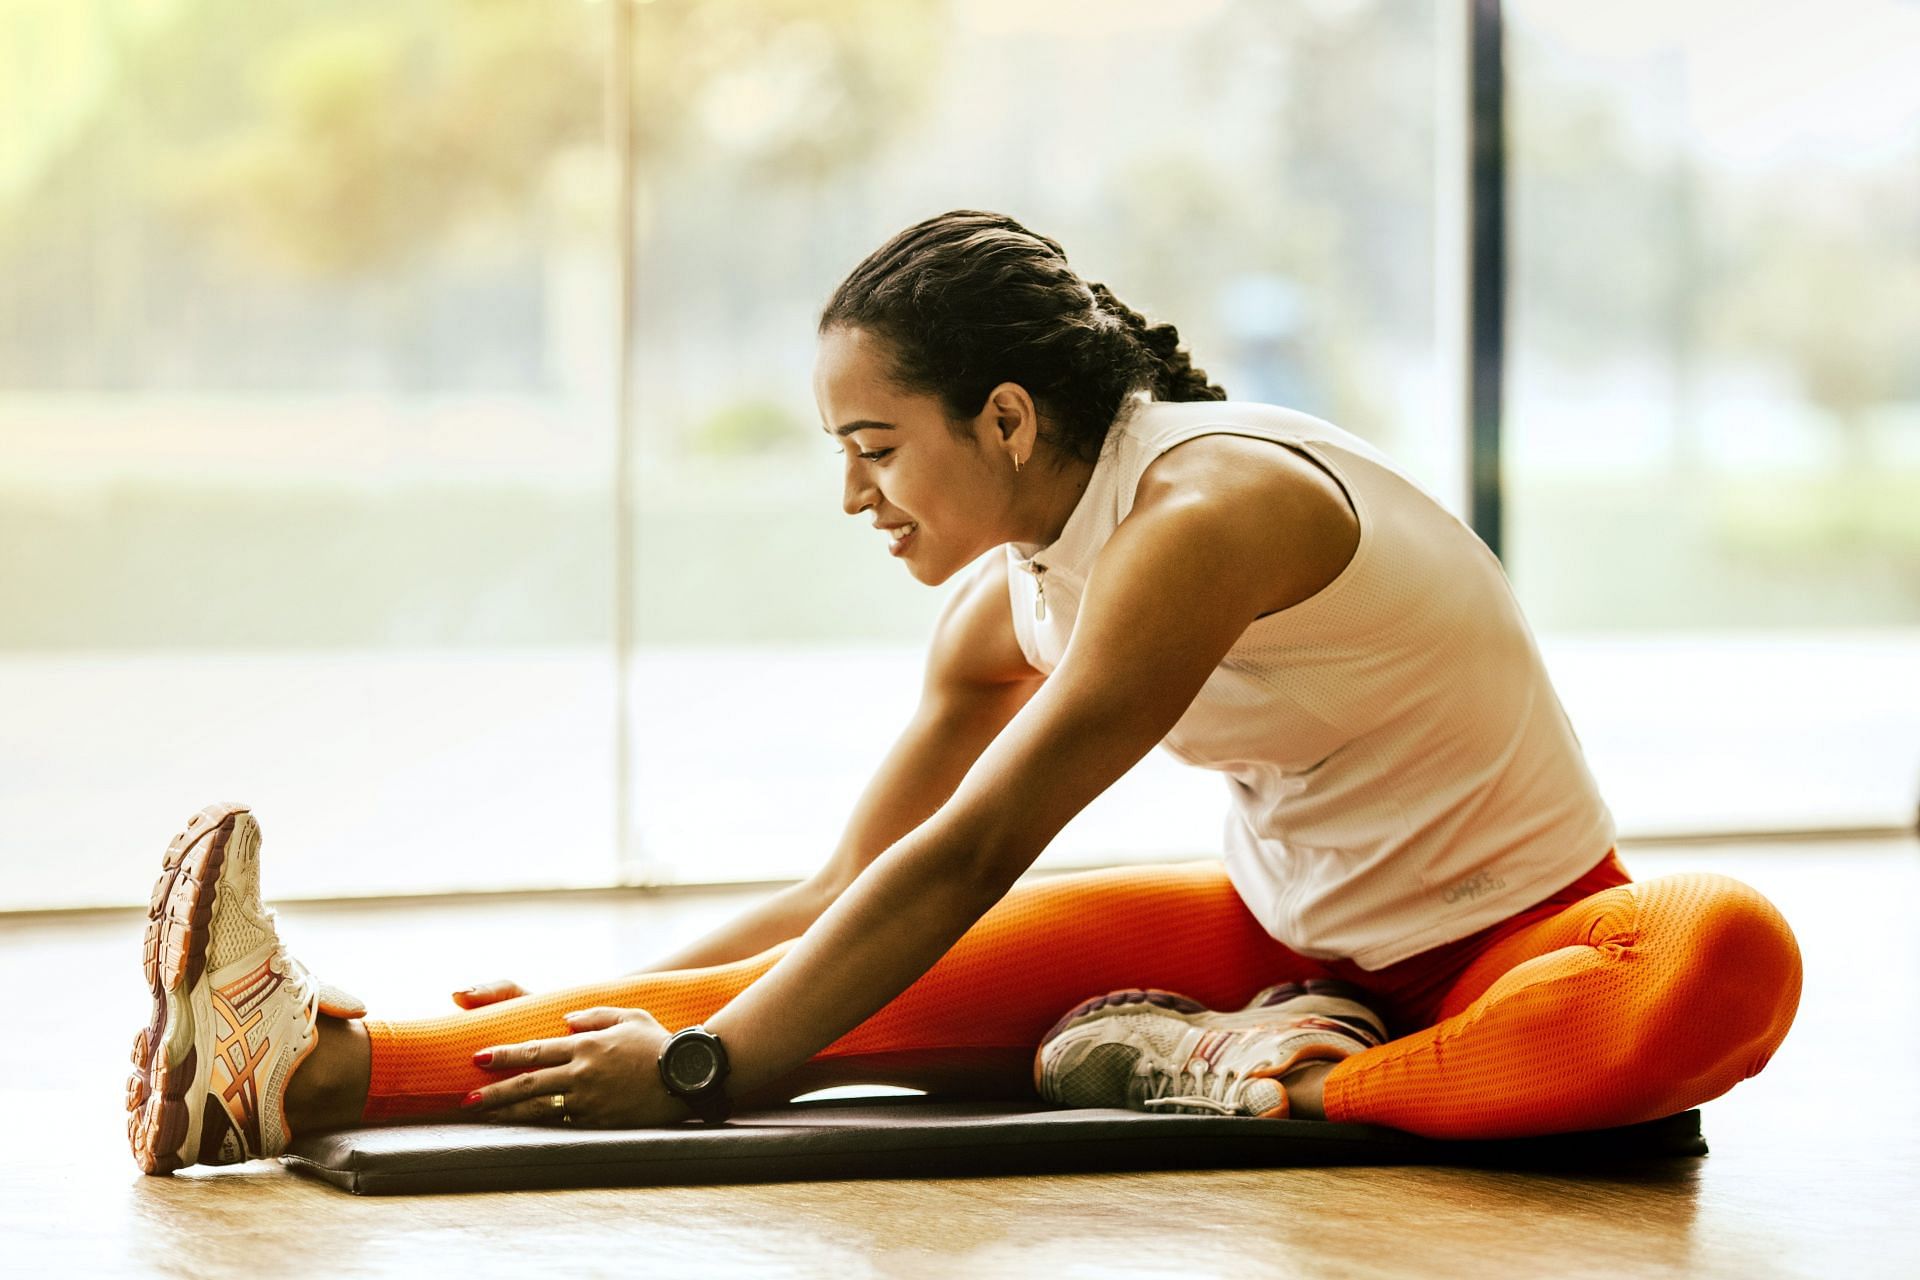 stretches for groin can help relieve pain. (Image via Pexels / Jonathan Borba)